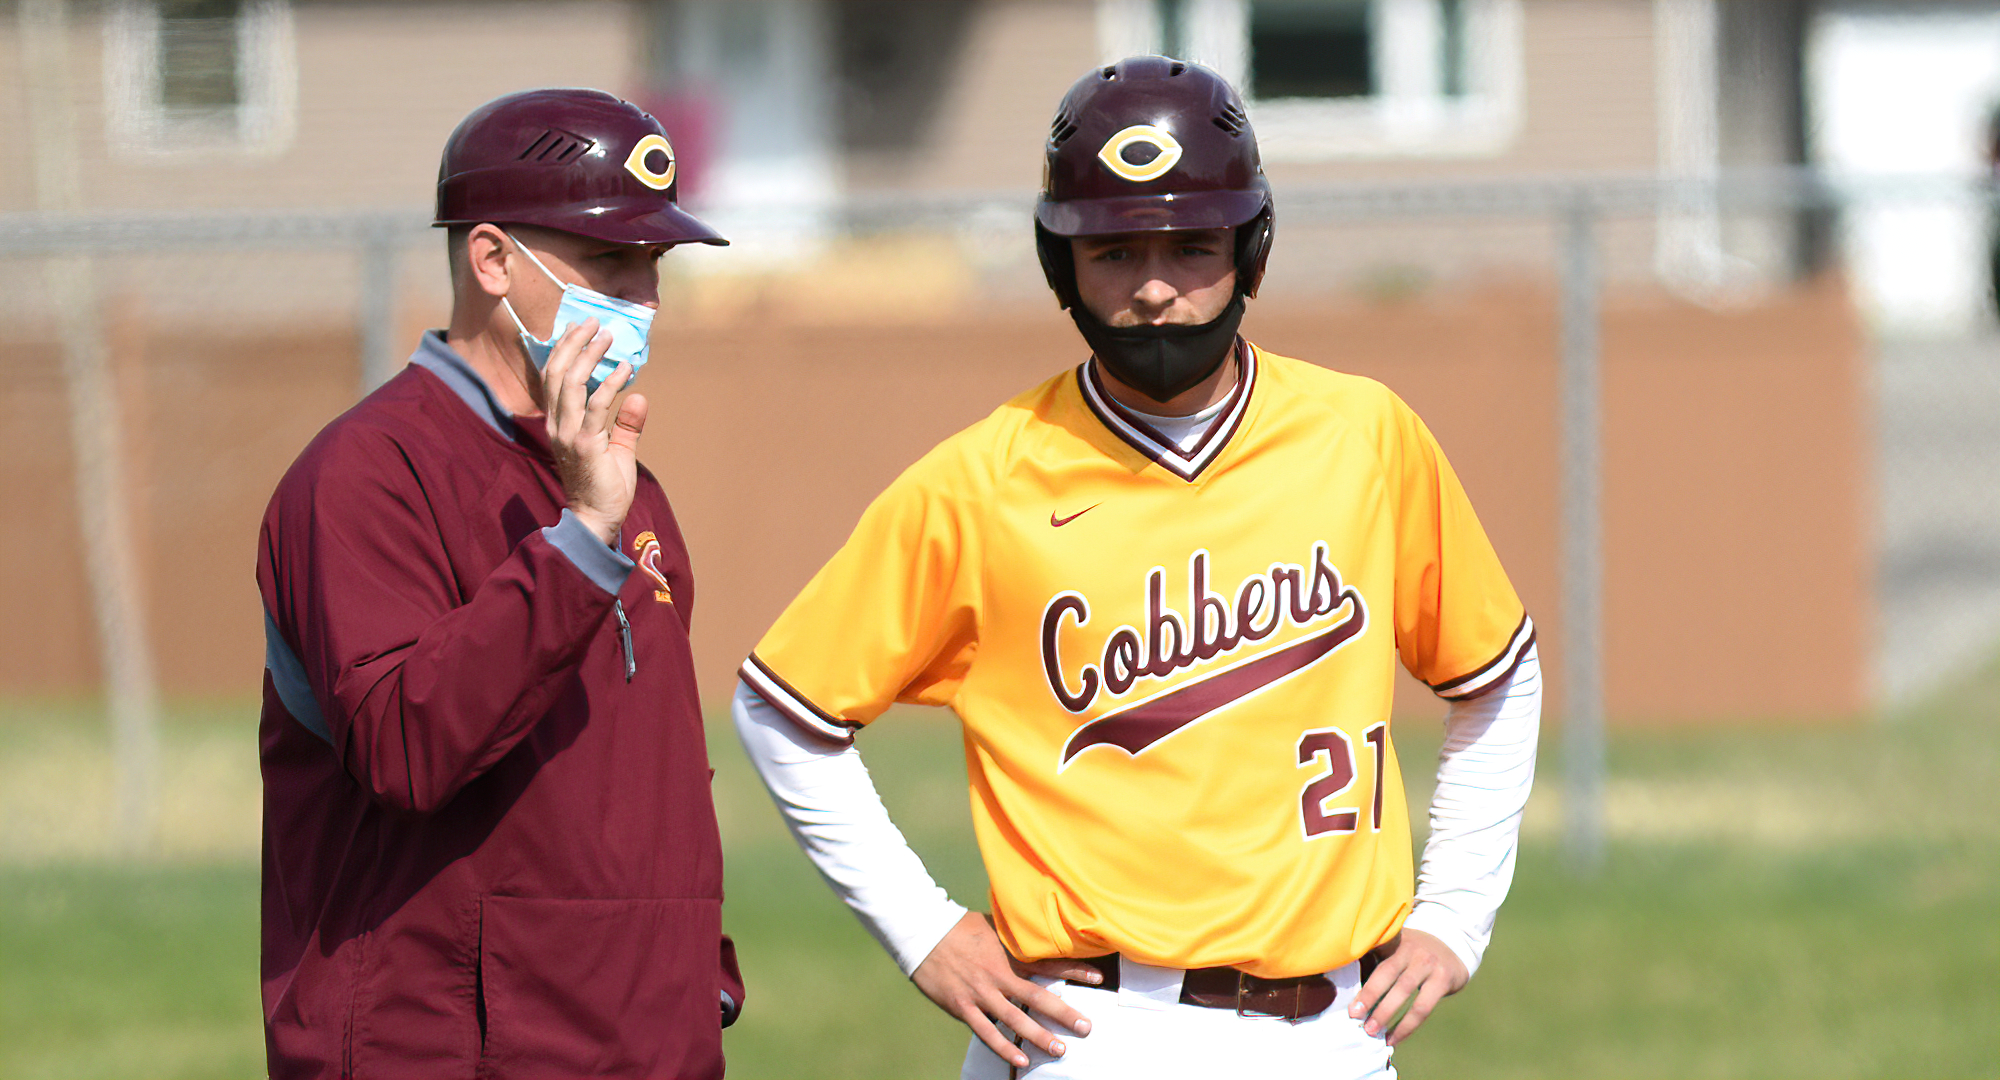 Wyatt Gunkel went 2-for-5 with a double and drove in two runs in the Cobbers' game with Dubuque. He leads CC in hitting with a .571 average.